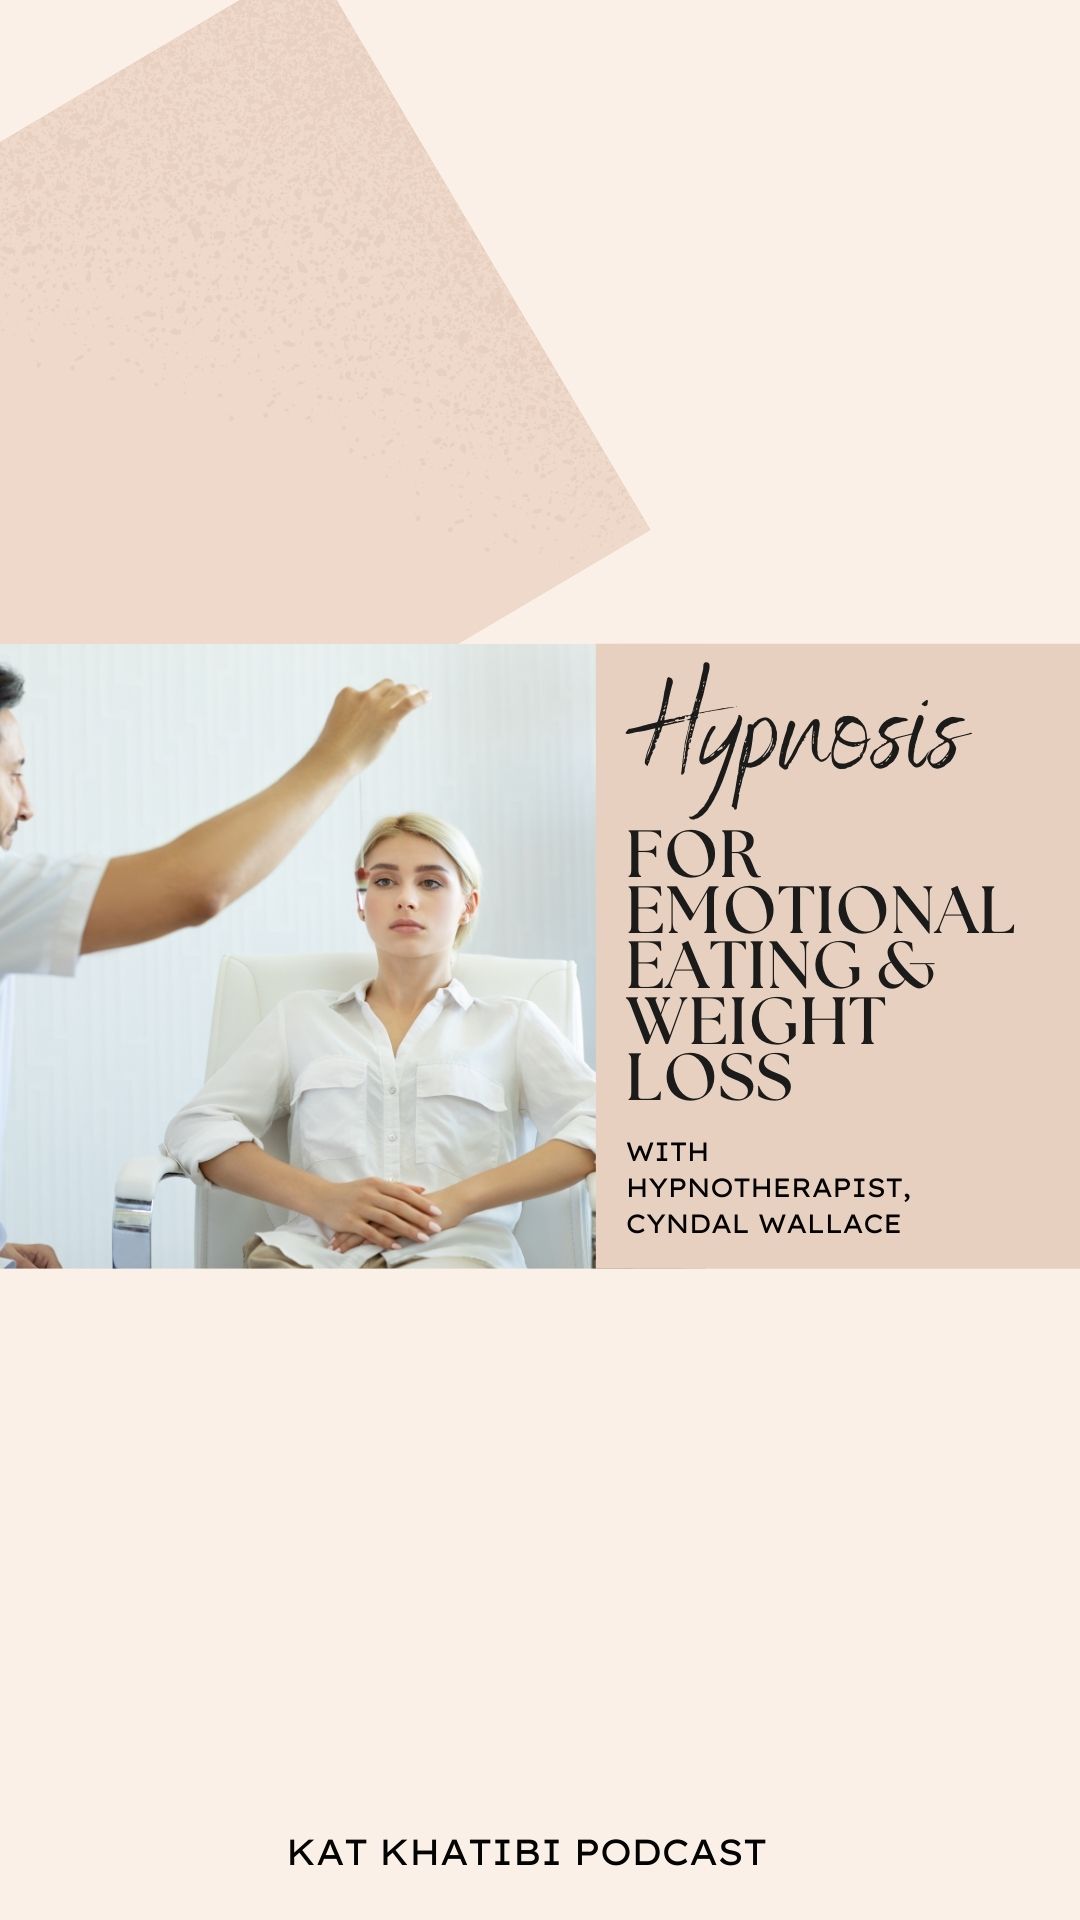 Hypnosis for Emotional Eating with hypnotherapist, Cyndal Wallace